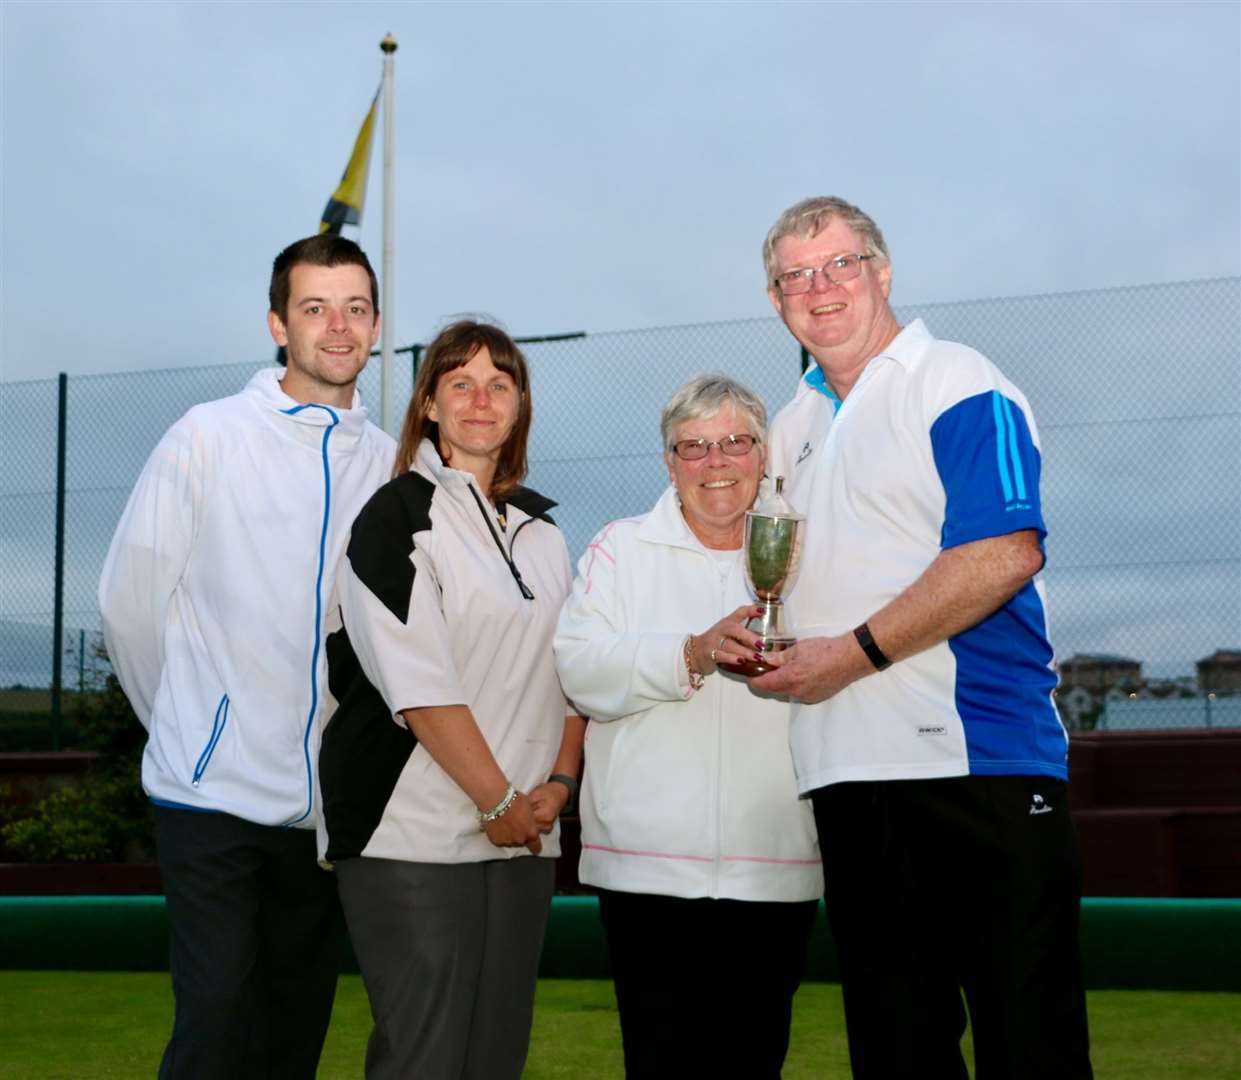 Cummings Cup finalists (from left) Alan Morrison, Marina Bain, Cath Irons and Douglas Morrison.